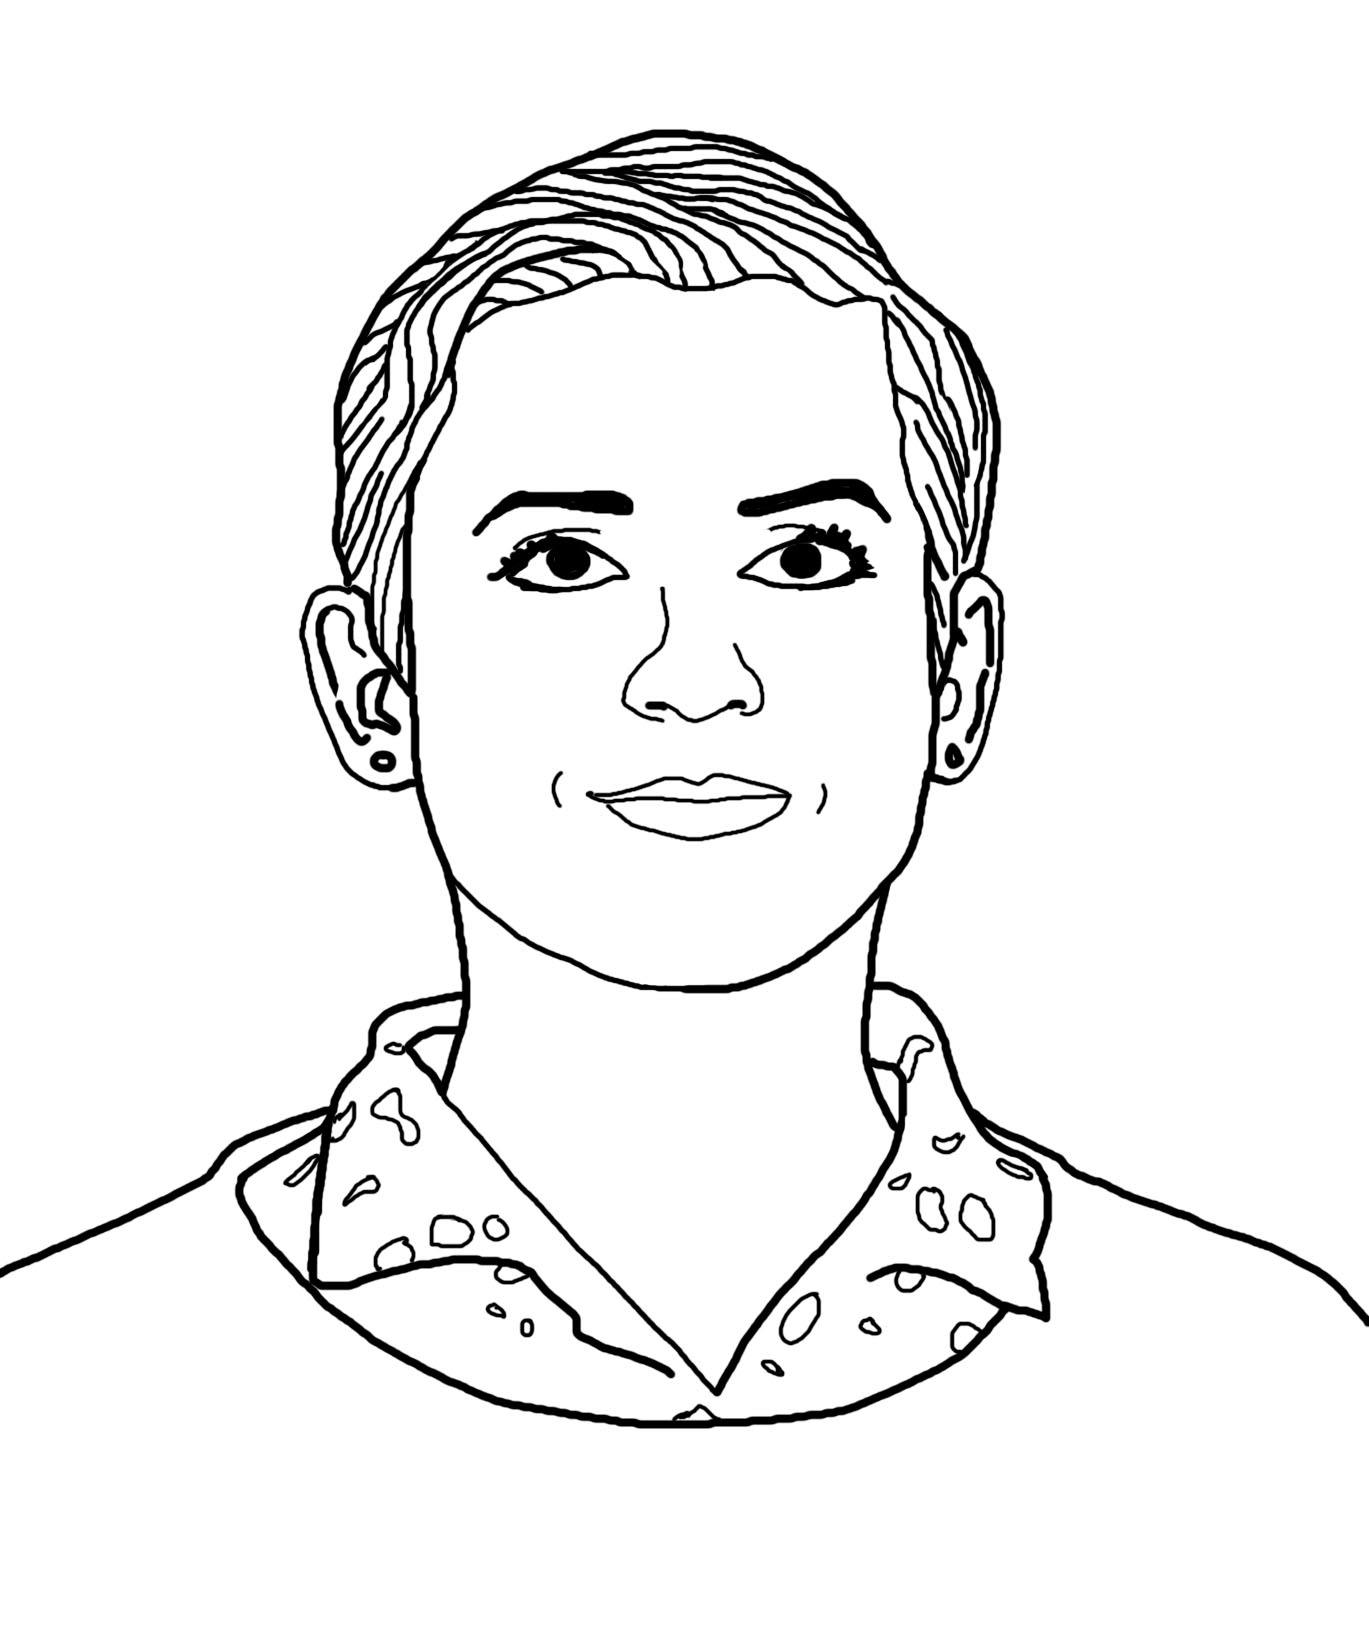 A black and white drawing of Kaitlyn Clark looking just above the viewer. She has short hair and is wearing a sweater with shirt collars poking out from beneath.